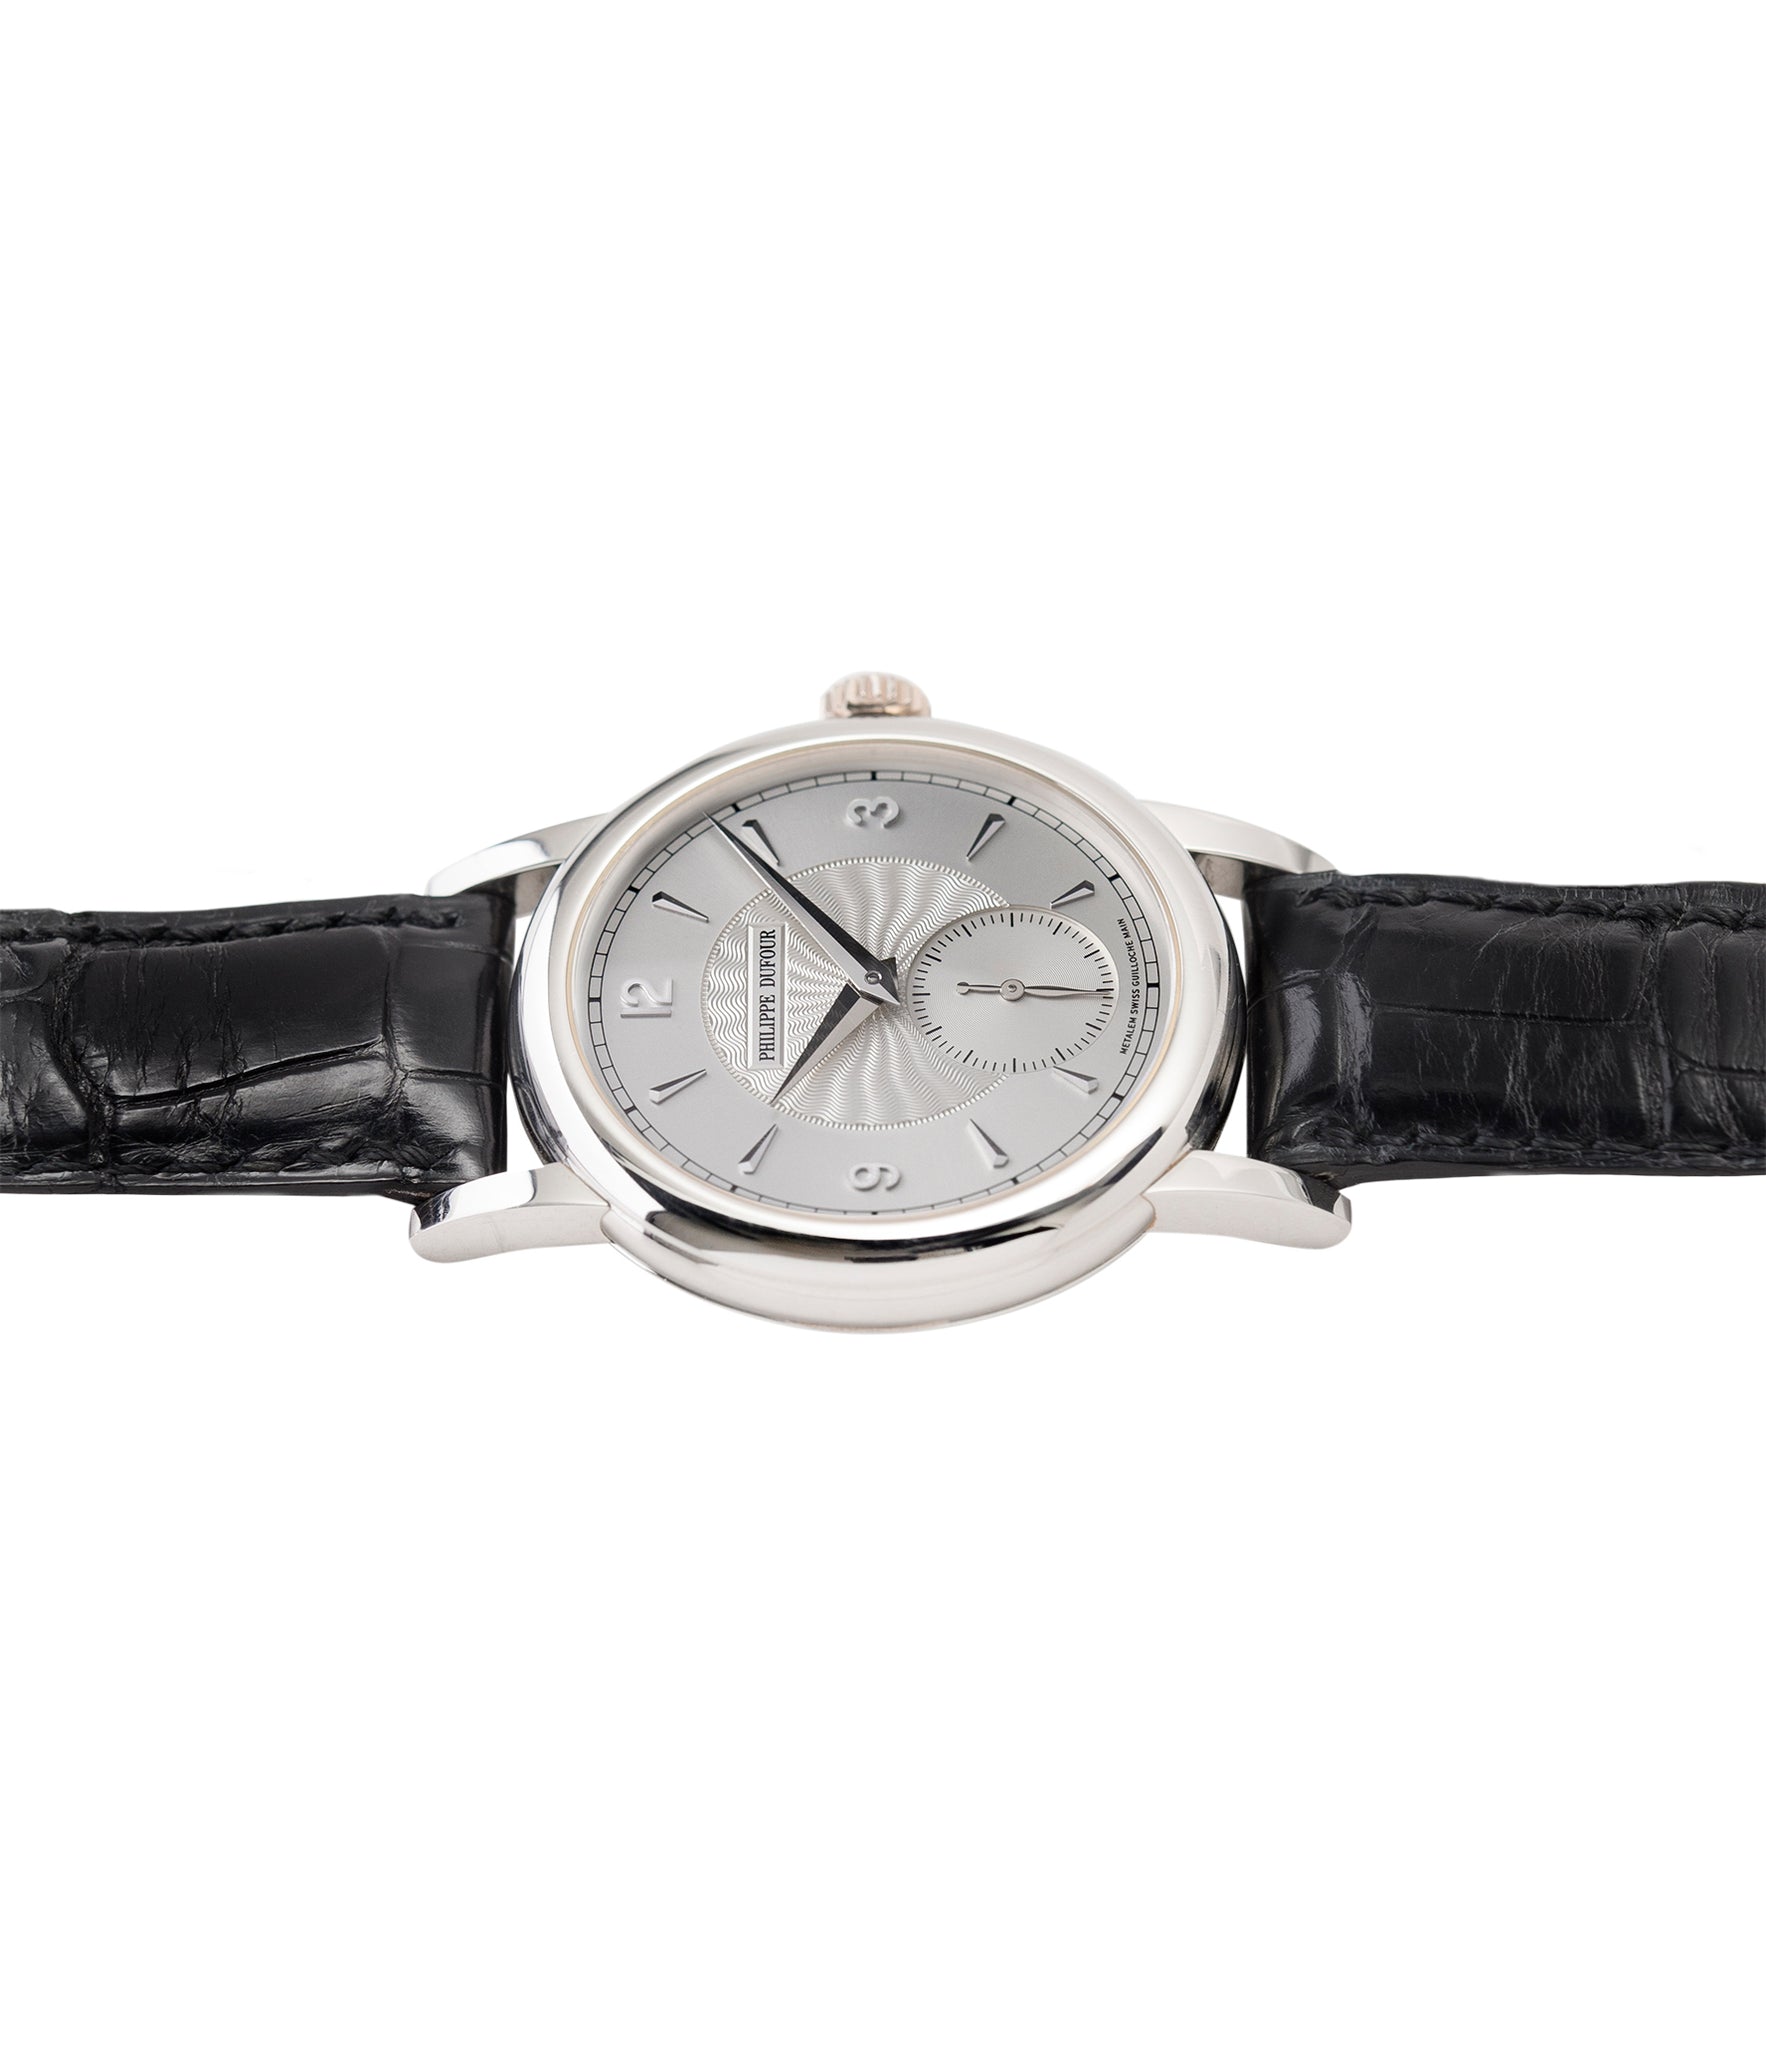 buy Simplicity watch by Philippe Dufour platinum time-only dress watch for sale online at A Collected Man London UK approved specialist of preowned independent watchmakers